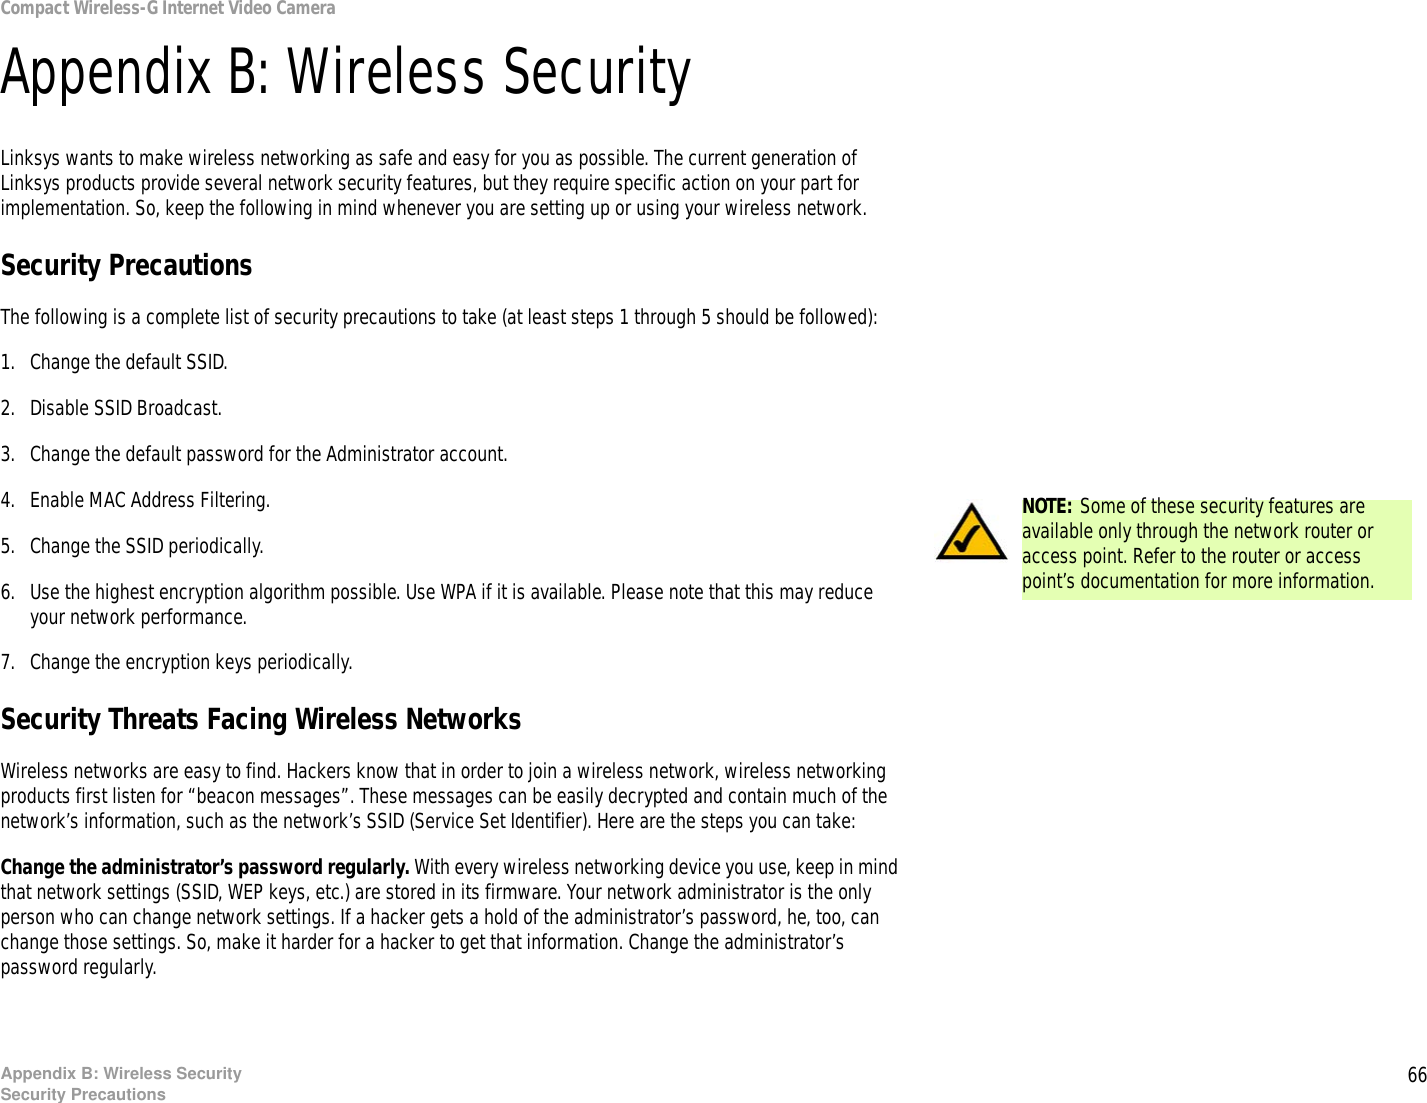 66Appendix B: Wireless SecuritySecurity PrecautionsCompact Wireless-G Internet Video CameraAppendix B: Wireless SecurityLinksys wants to make wireless networking as safe and easy for you as possible. The current generation of Linksys products provide several network security features, but they require specific action on your part for implementation. So, keep the following in mind whenever you are setting up or using your wireless network.Security PrecautionsThe following is a complete list of security precautions to take (at least steps 1 through 5 should be followed):1. Change the default SSID. 2. Disable SSID Broadcast. 3. Change the default password for the Administrator account. 4. Enable MAC Address Filtering. 5. Change the SSID periodically. 6. Use the highest encryption algorithm possible. Use WPA if it is available. Please note that this may reduce your network performance. 7. Change the encryption keys periodically. Security Threats Facing Wireless Networks Wireless networks are easy to find. Hackers know that in order to join a wireless network, wireless networking products first listen for “beacon messages”. These messages can be easily decrypted and contain much of the network’s information, such as the network’s SSID (Service Set Identifier). Here are the steps you can take:Change the administrator’s password regularly. With every wireless networking device you use, keep in mind that network settings (SSID, WEP keys, etc.) are stored in its firmware. Your network administrator is the only person who can change network settings. If a hacker gets a hold of the administrator’s password, he, too, can change those settings. So, make it harder for a hacker to get that information. Change the administrator’s password regularly.NOTE: Some of these security features are available only through the network router or access point. Refer to the router or access point’s documentation for more information.